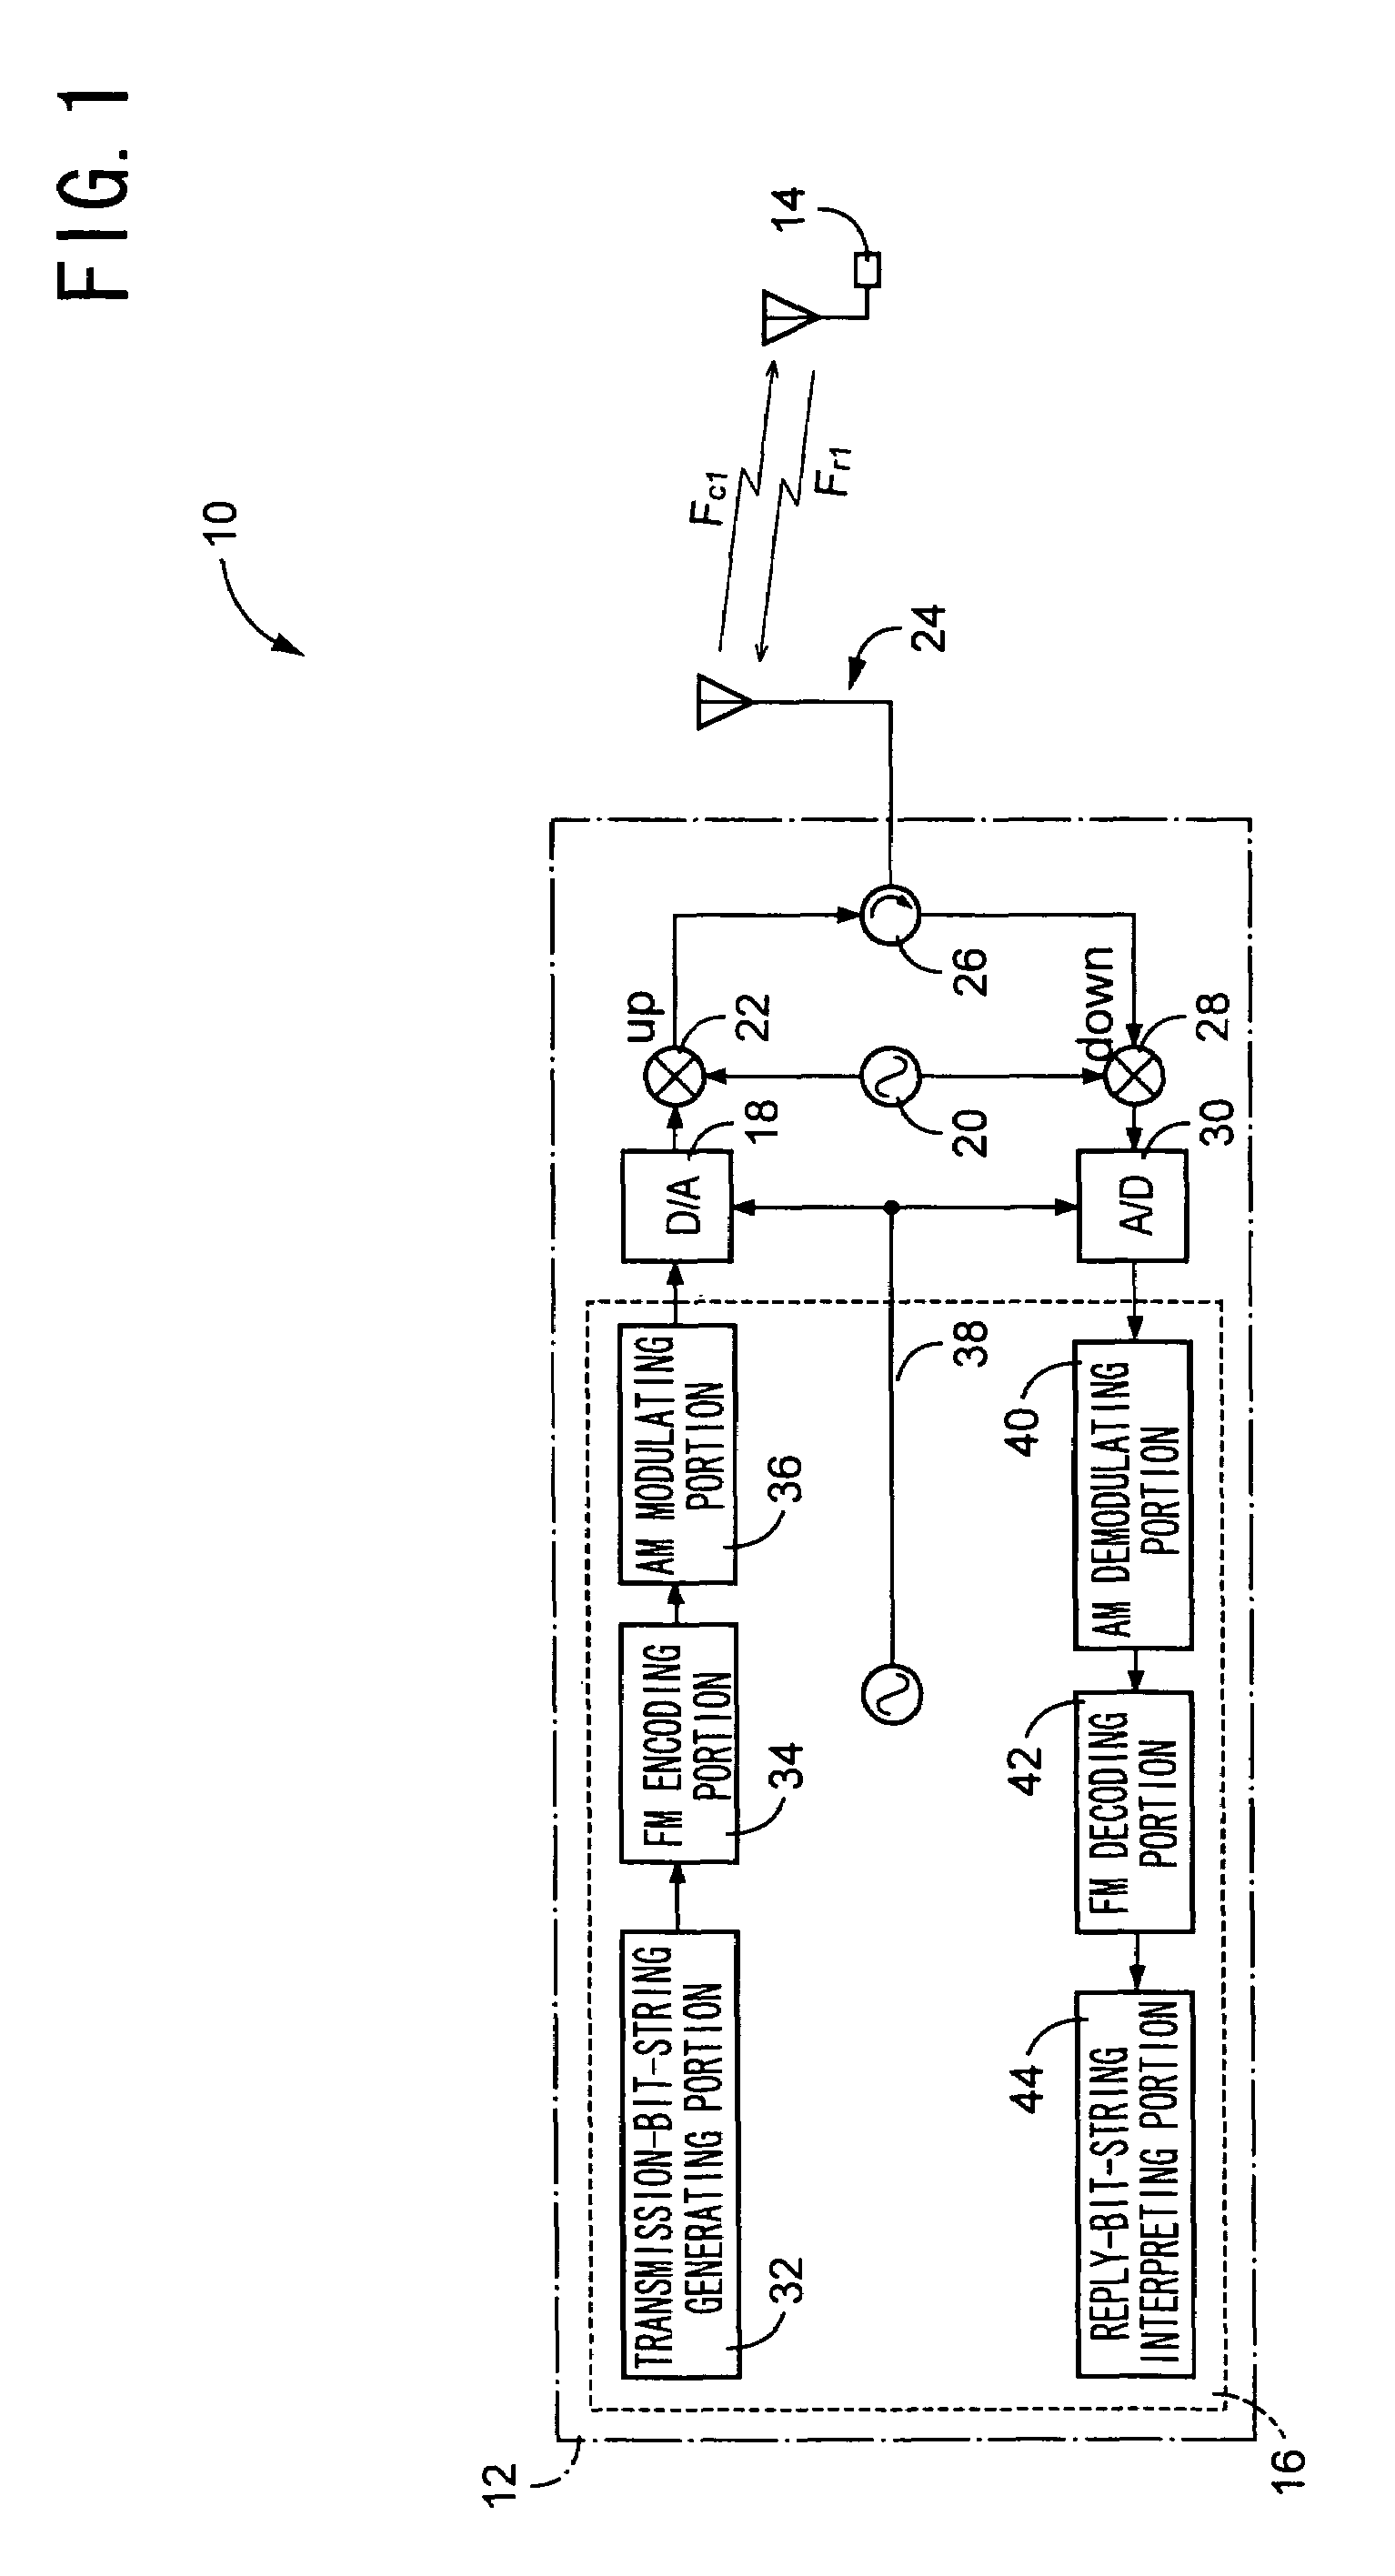 Radio-frequency identification tag communication device